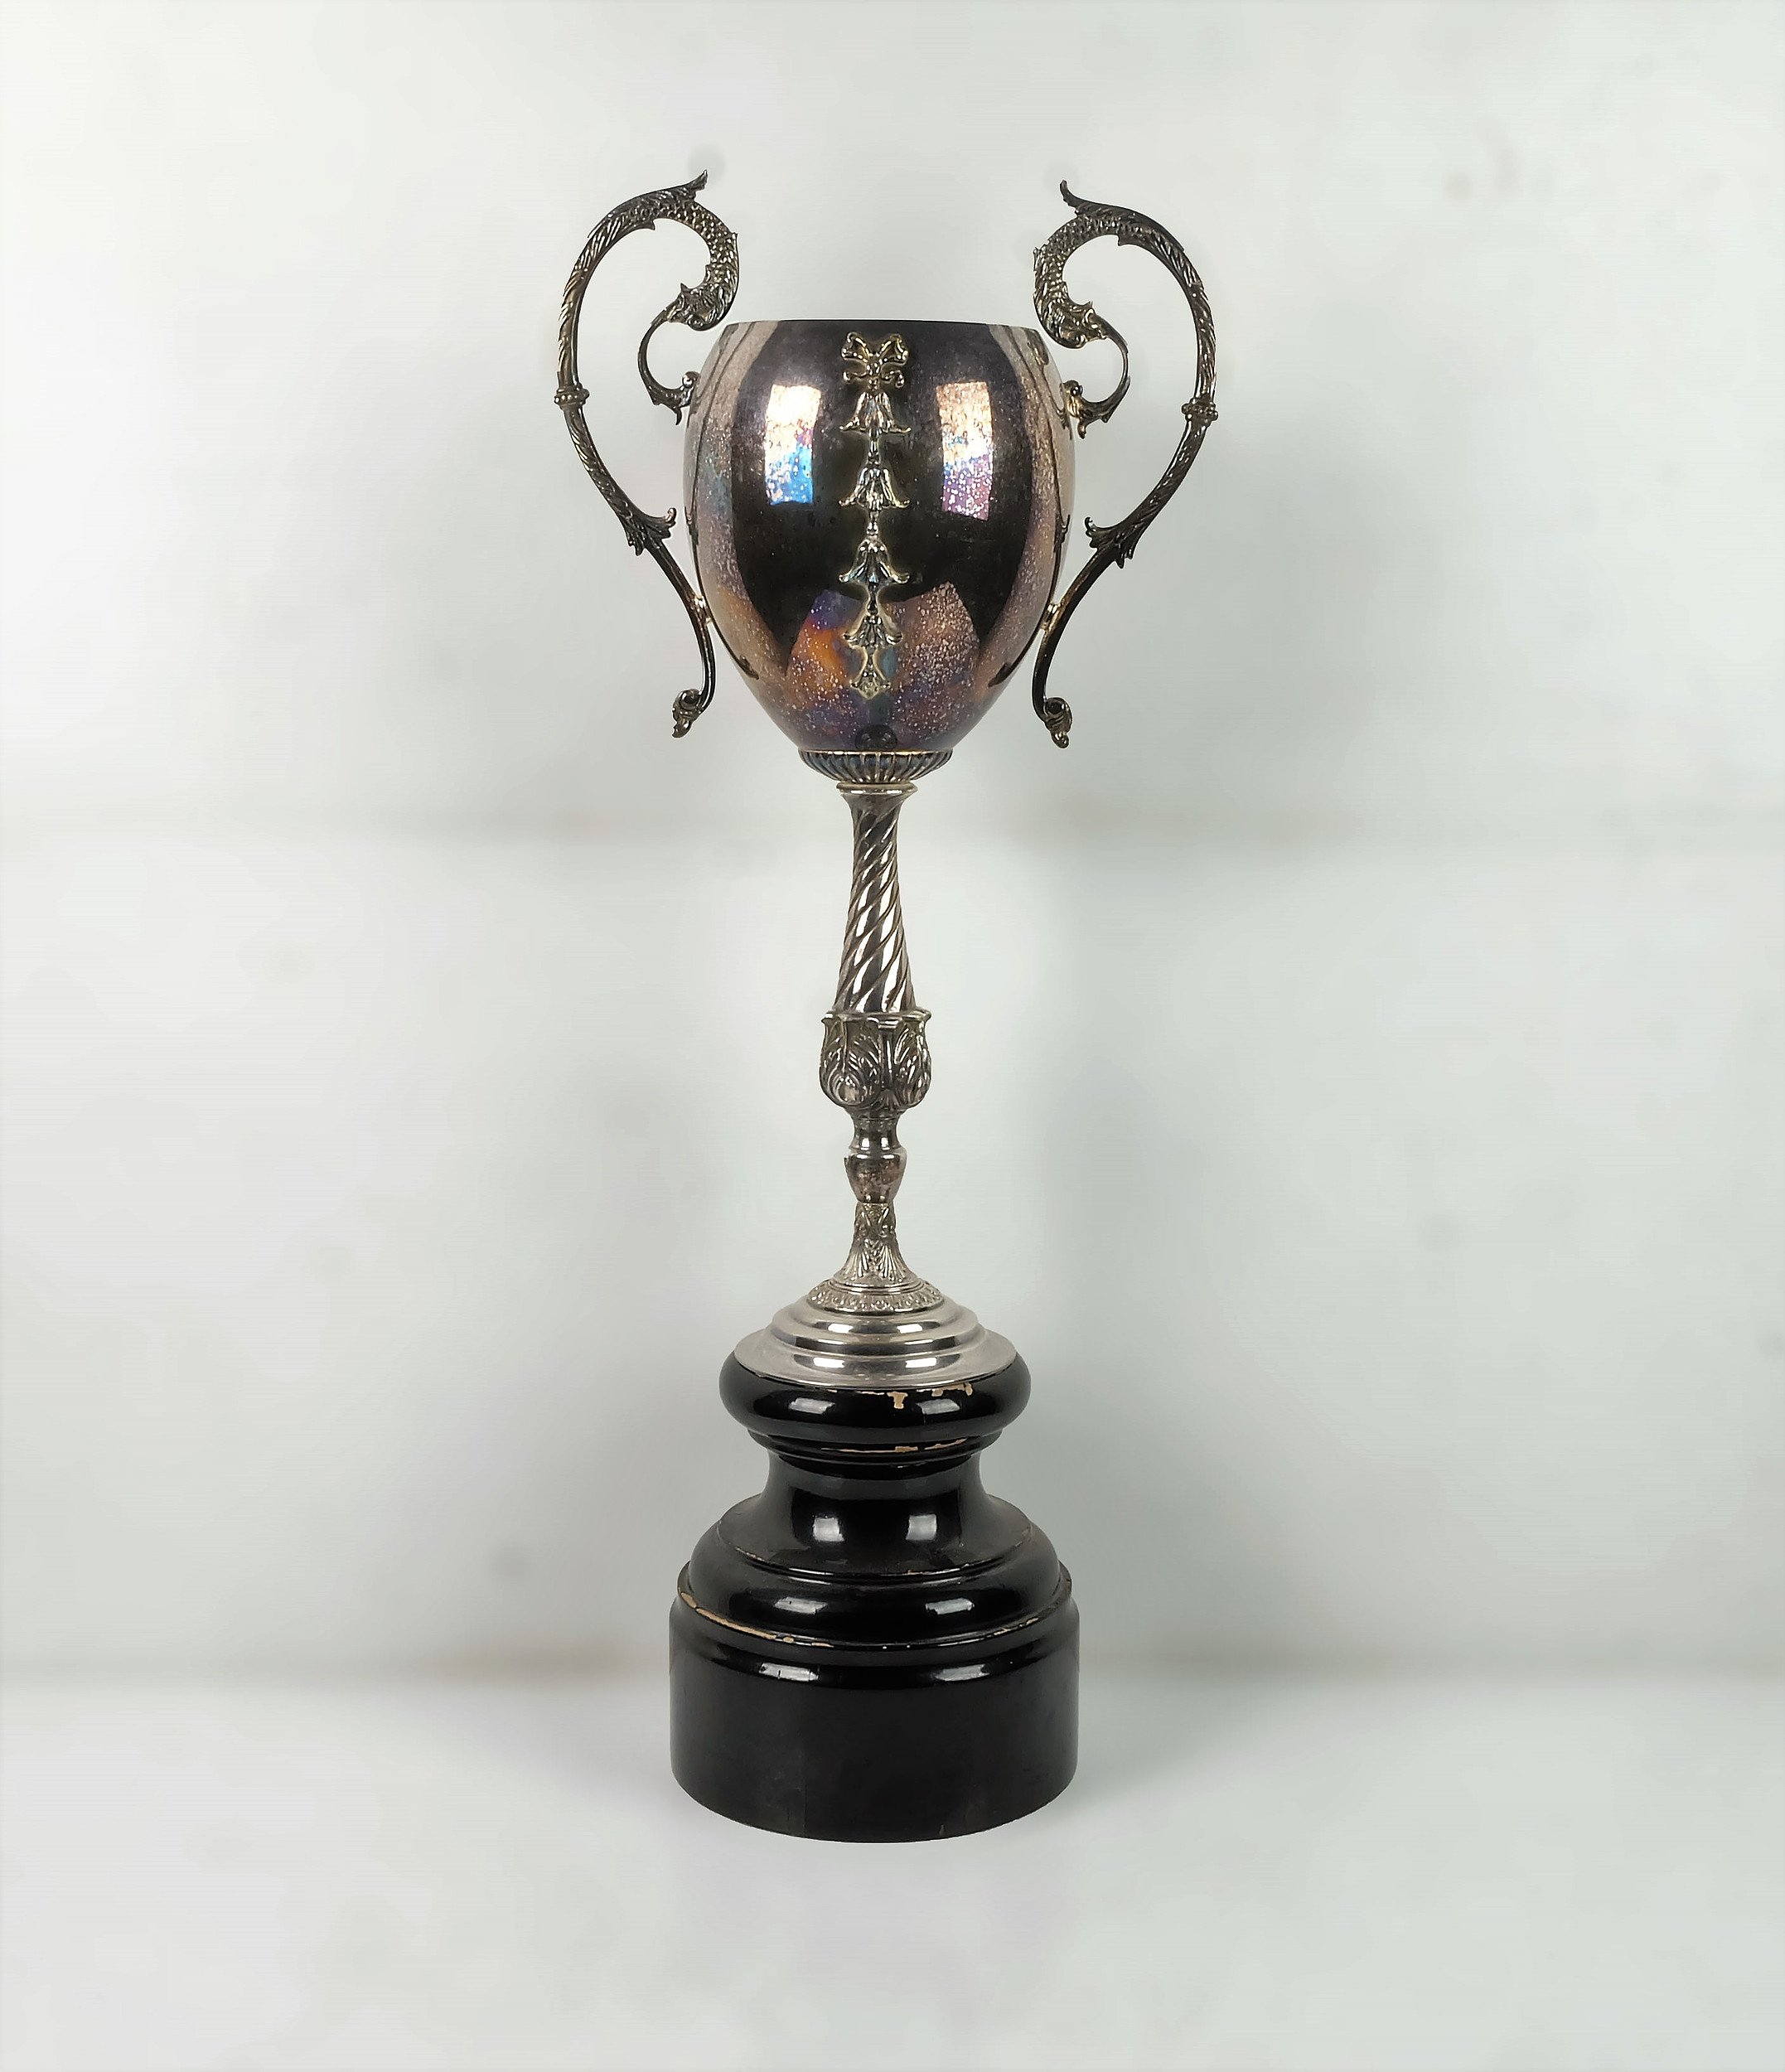 'Tall Vintage Silver Plated Trophy with Serpent Form Handles and Bow Detailing'